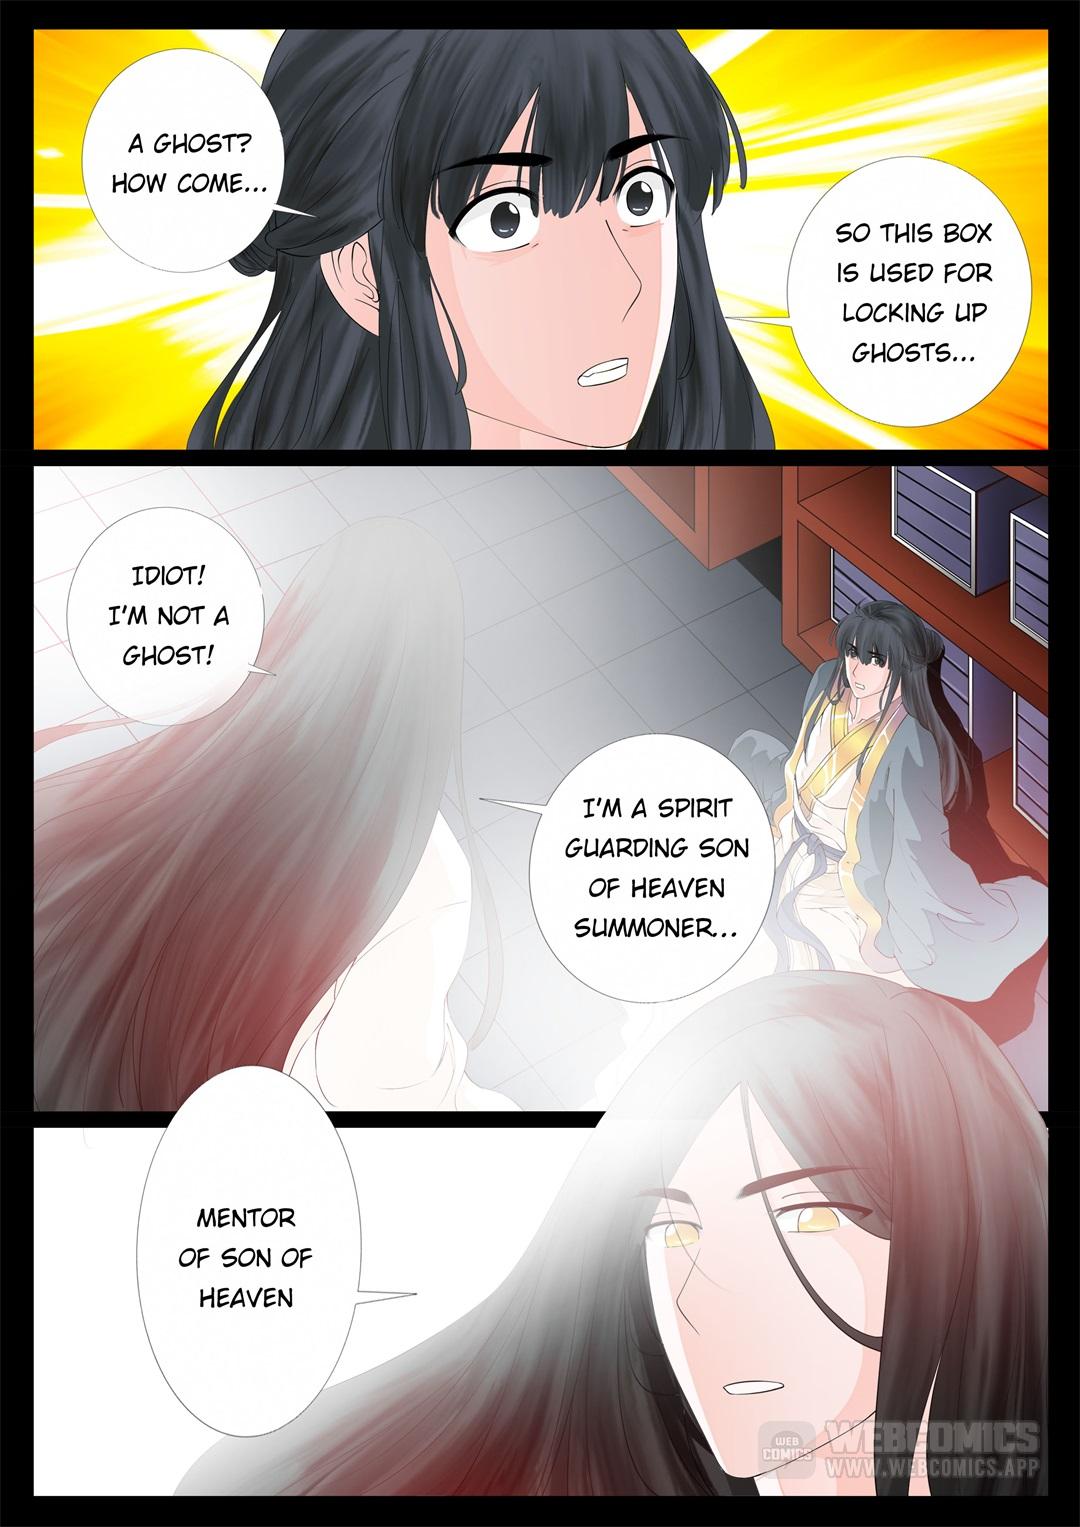 Dragon Amulet: The Emperor And The Country - Page 1